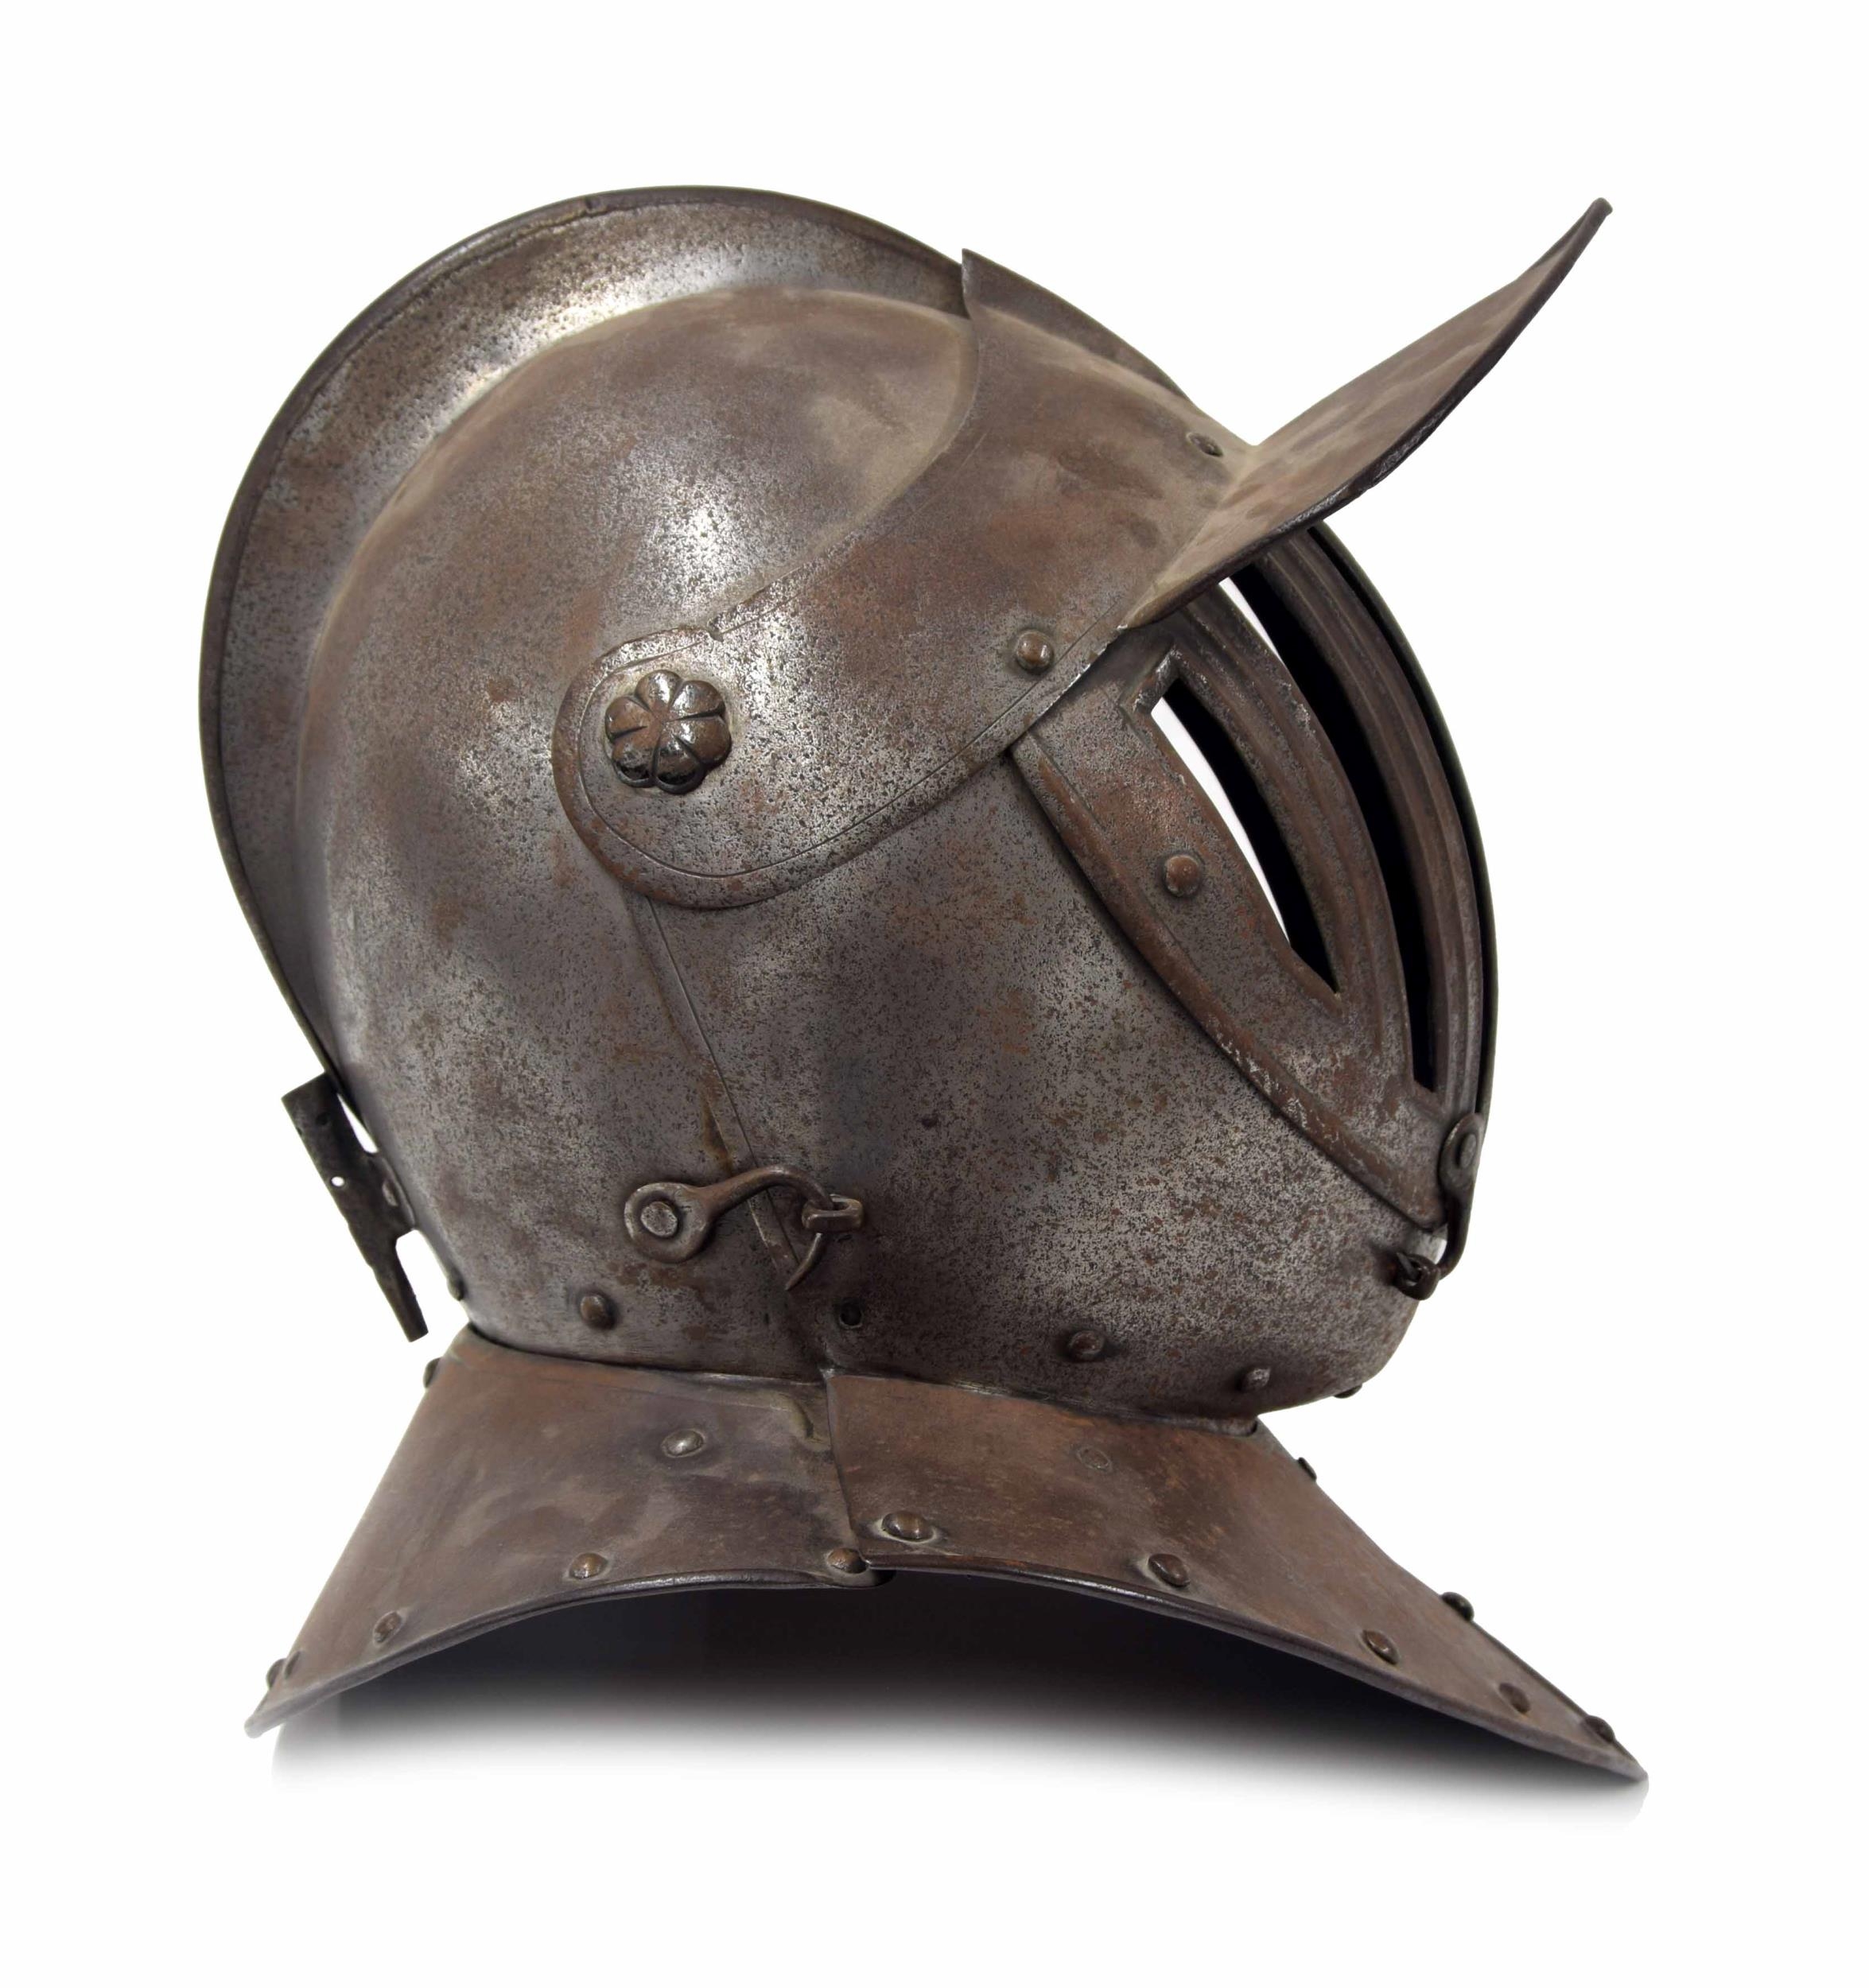 17th century style north European cuirassier siege steel helmet, with studded decoration and - Image 2 of 6